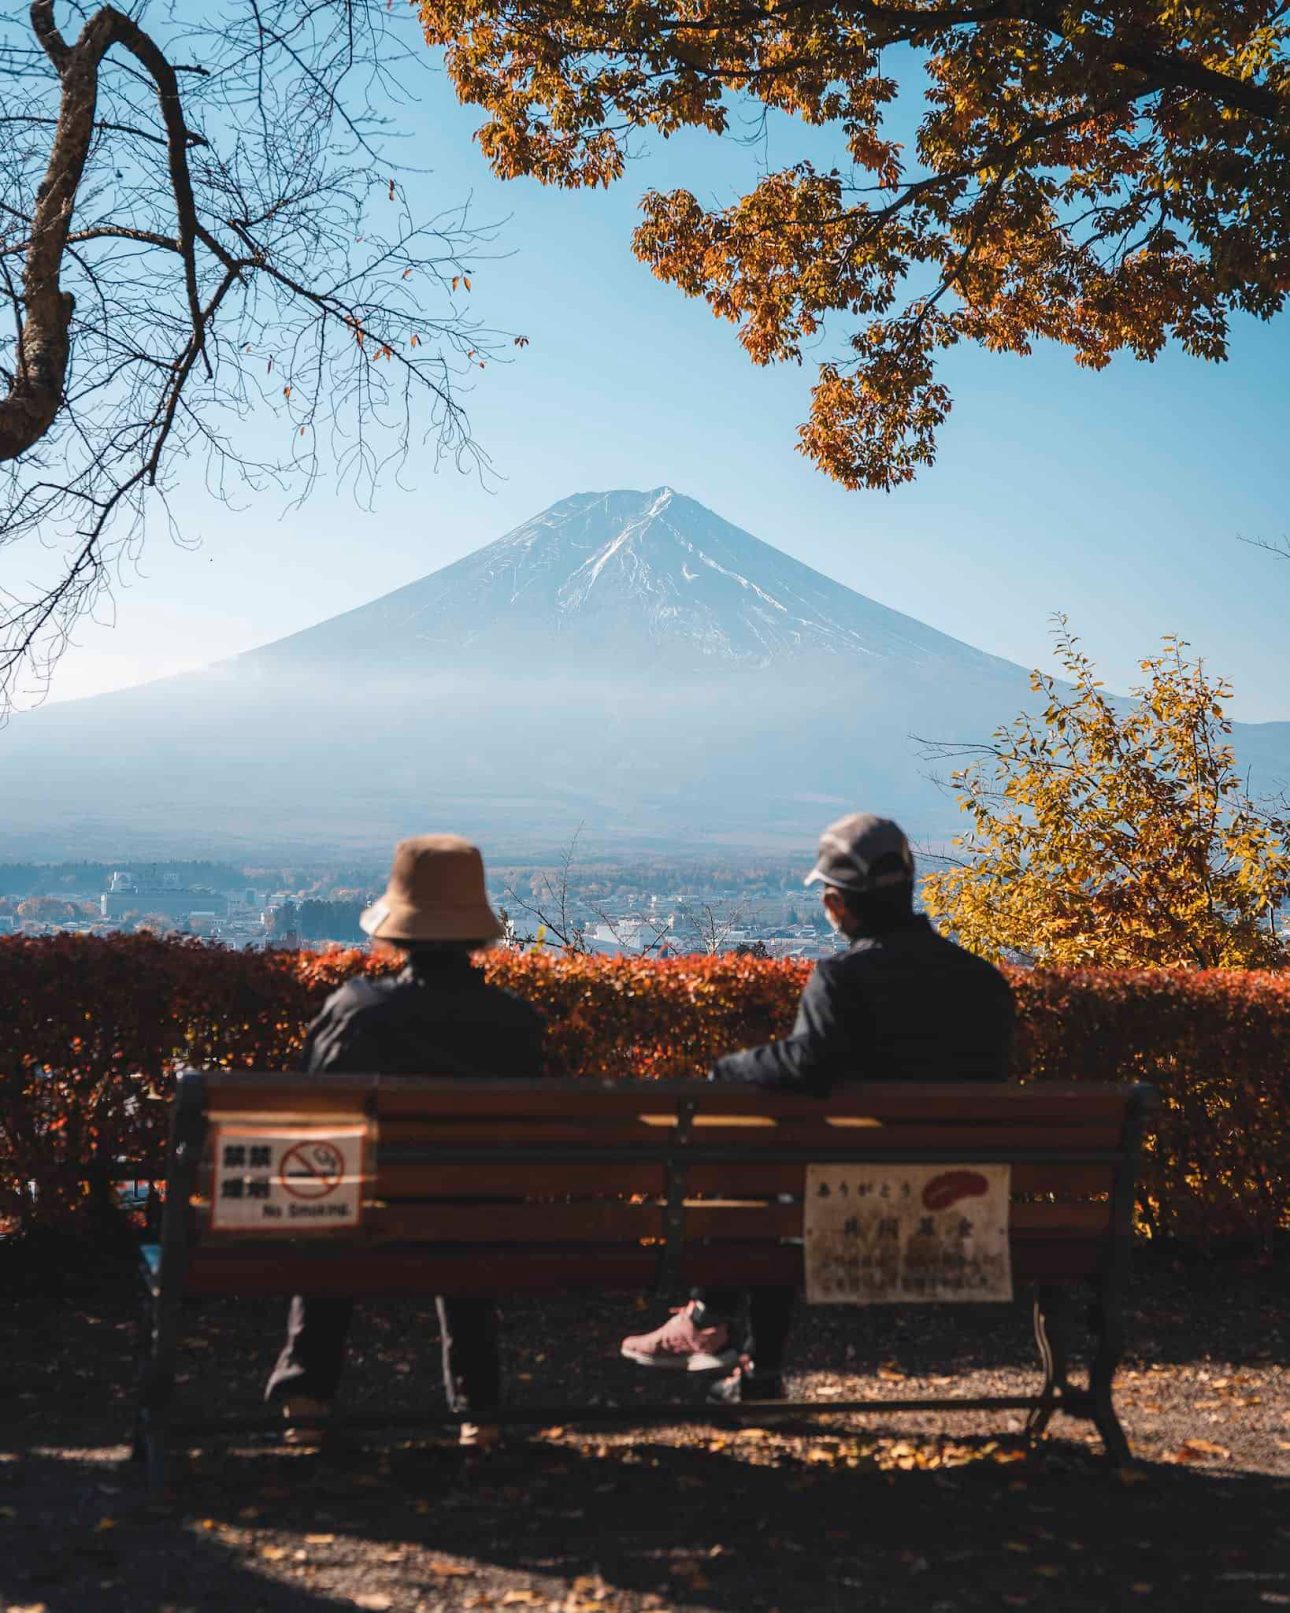 Couple Sitting on a Bench and Looking at Mount Fuji 